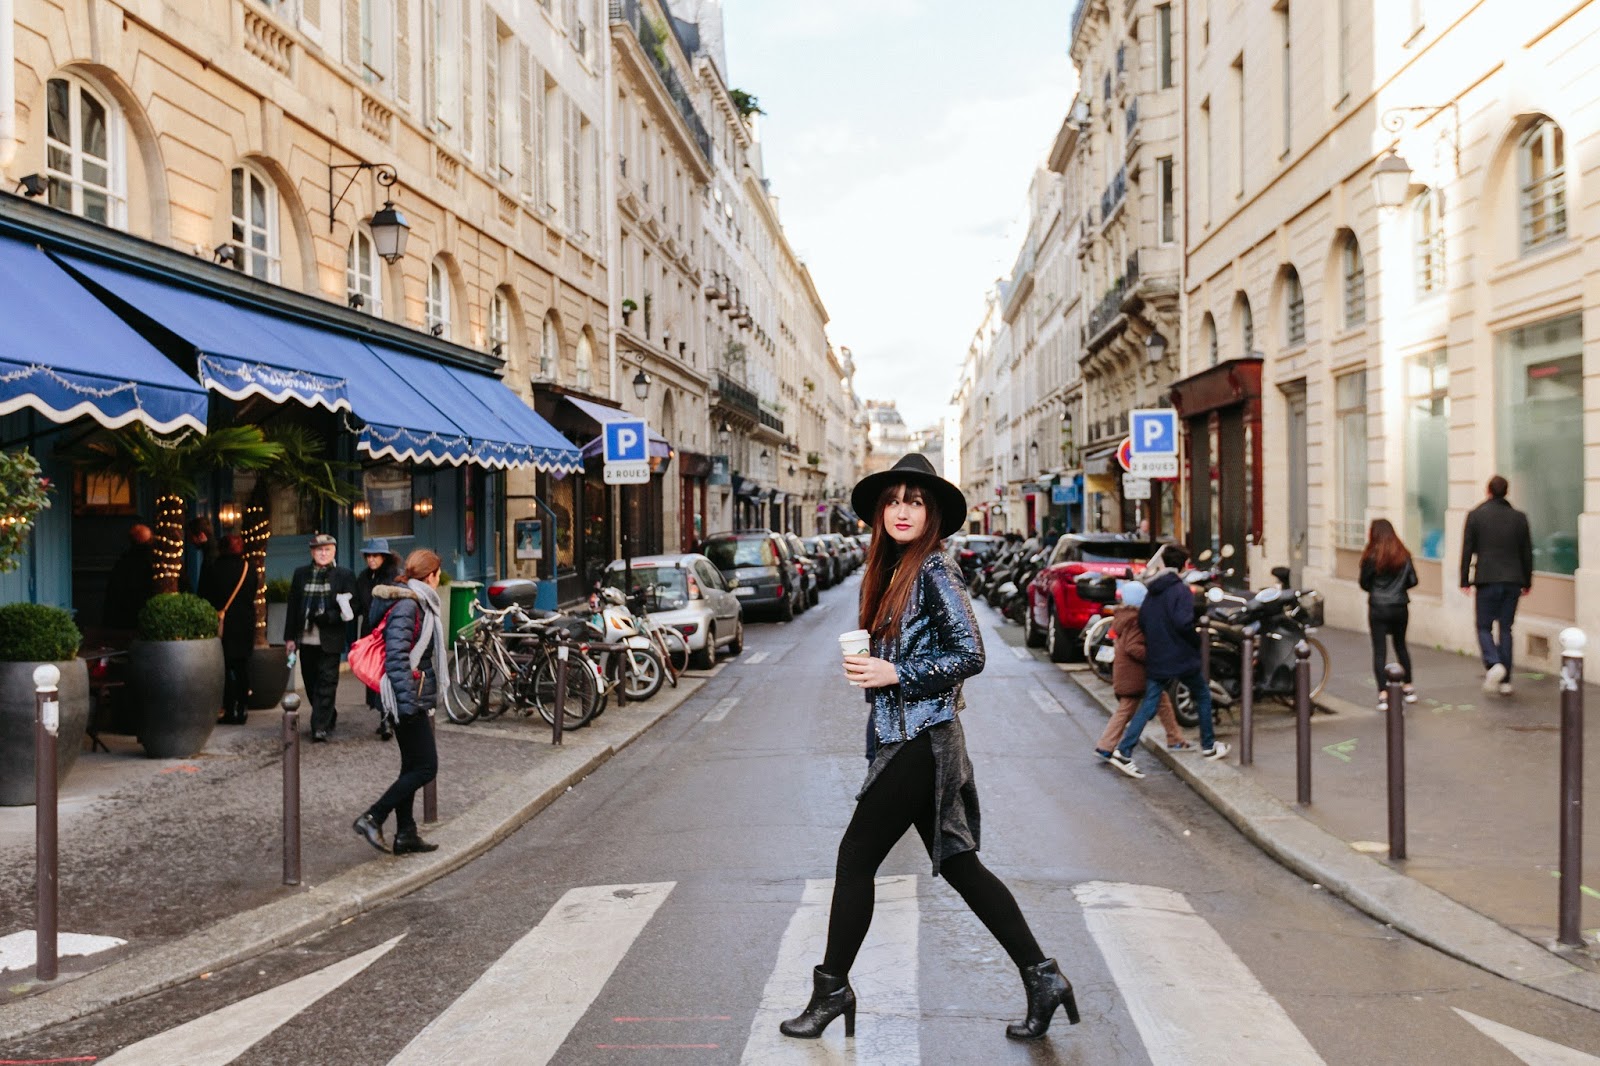 meet me in paree, blogger, fashion, look, style, parisian style